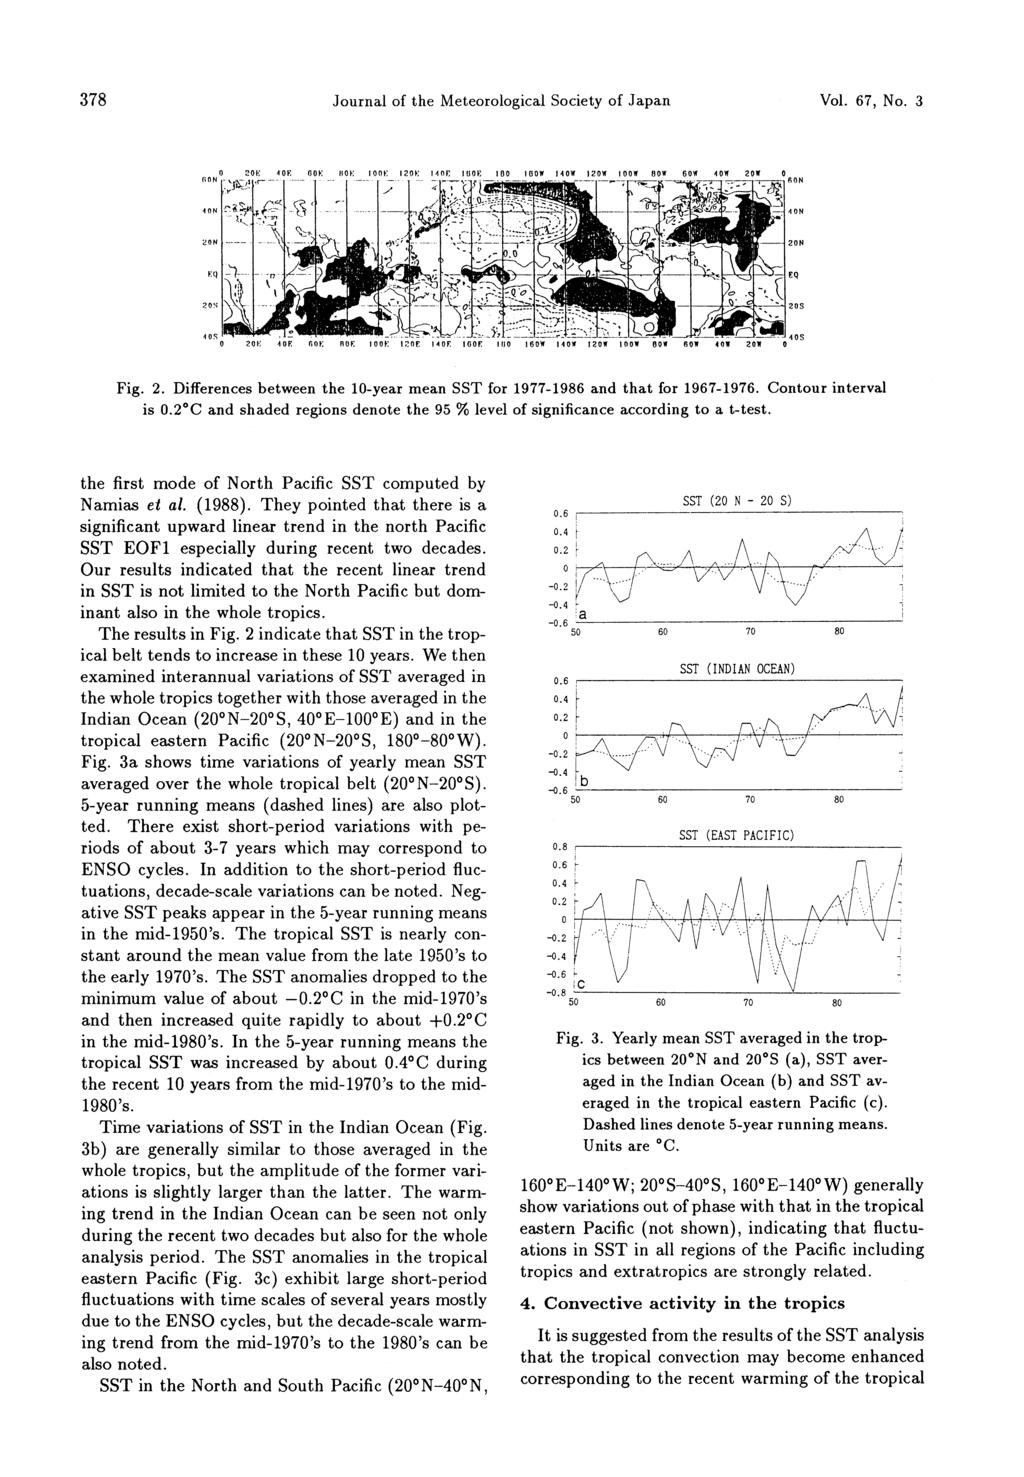 378 Journal of the Meteorological Society of Japan Vol. 67, No. 3 Fig. 2. Differences between the 10-year mean SST for 1977-1986 and that for 1967-1976. Contour interval is 0.